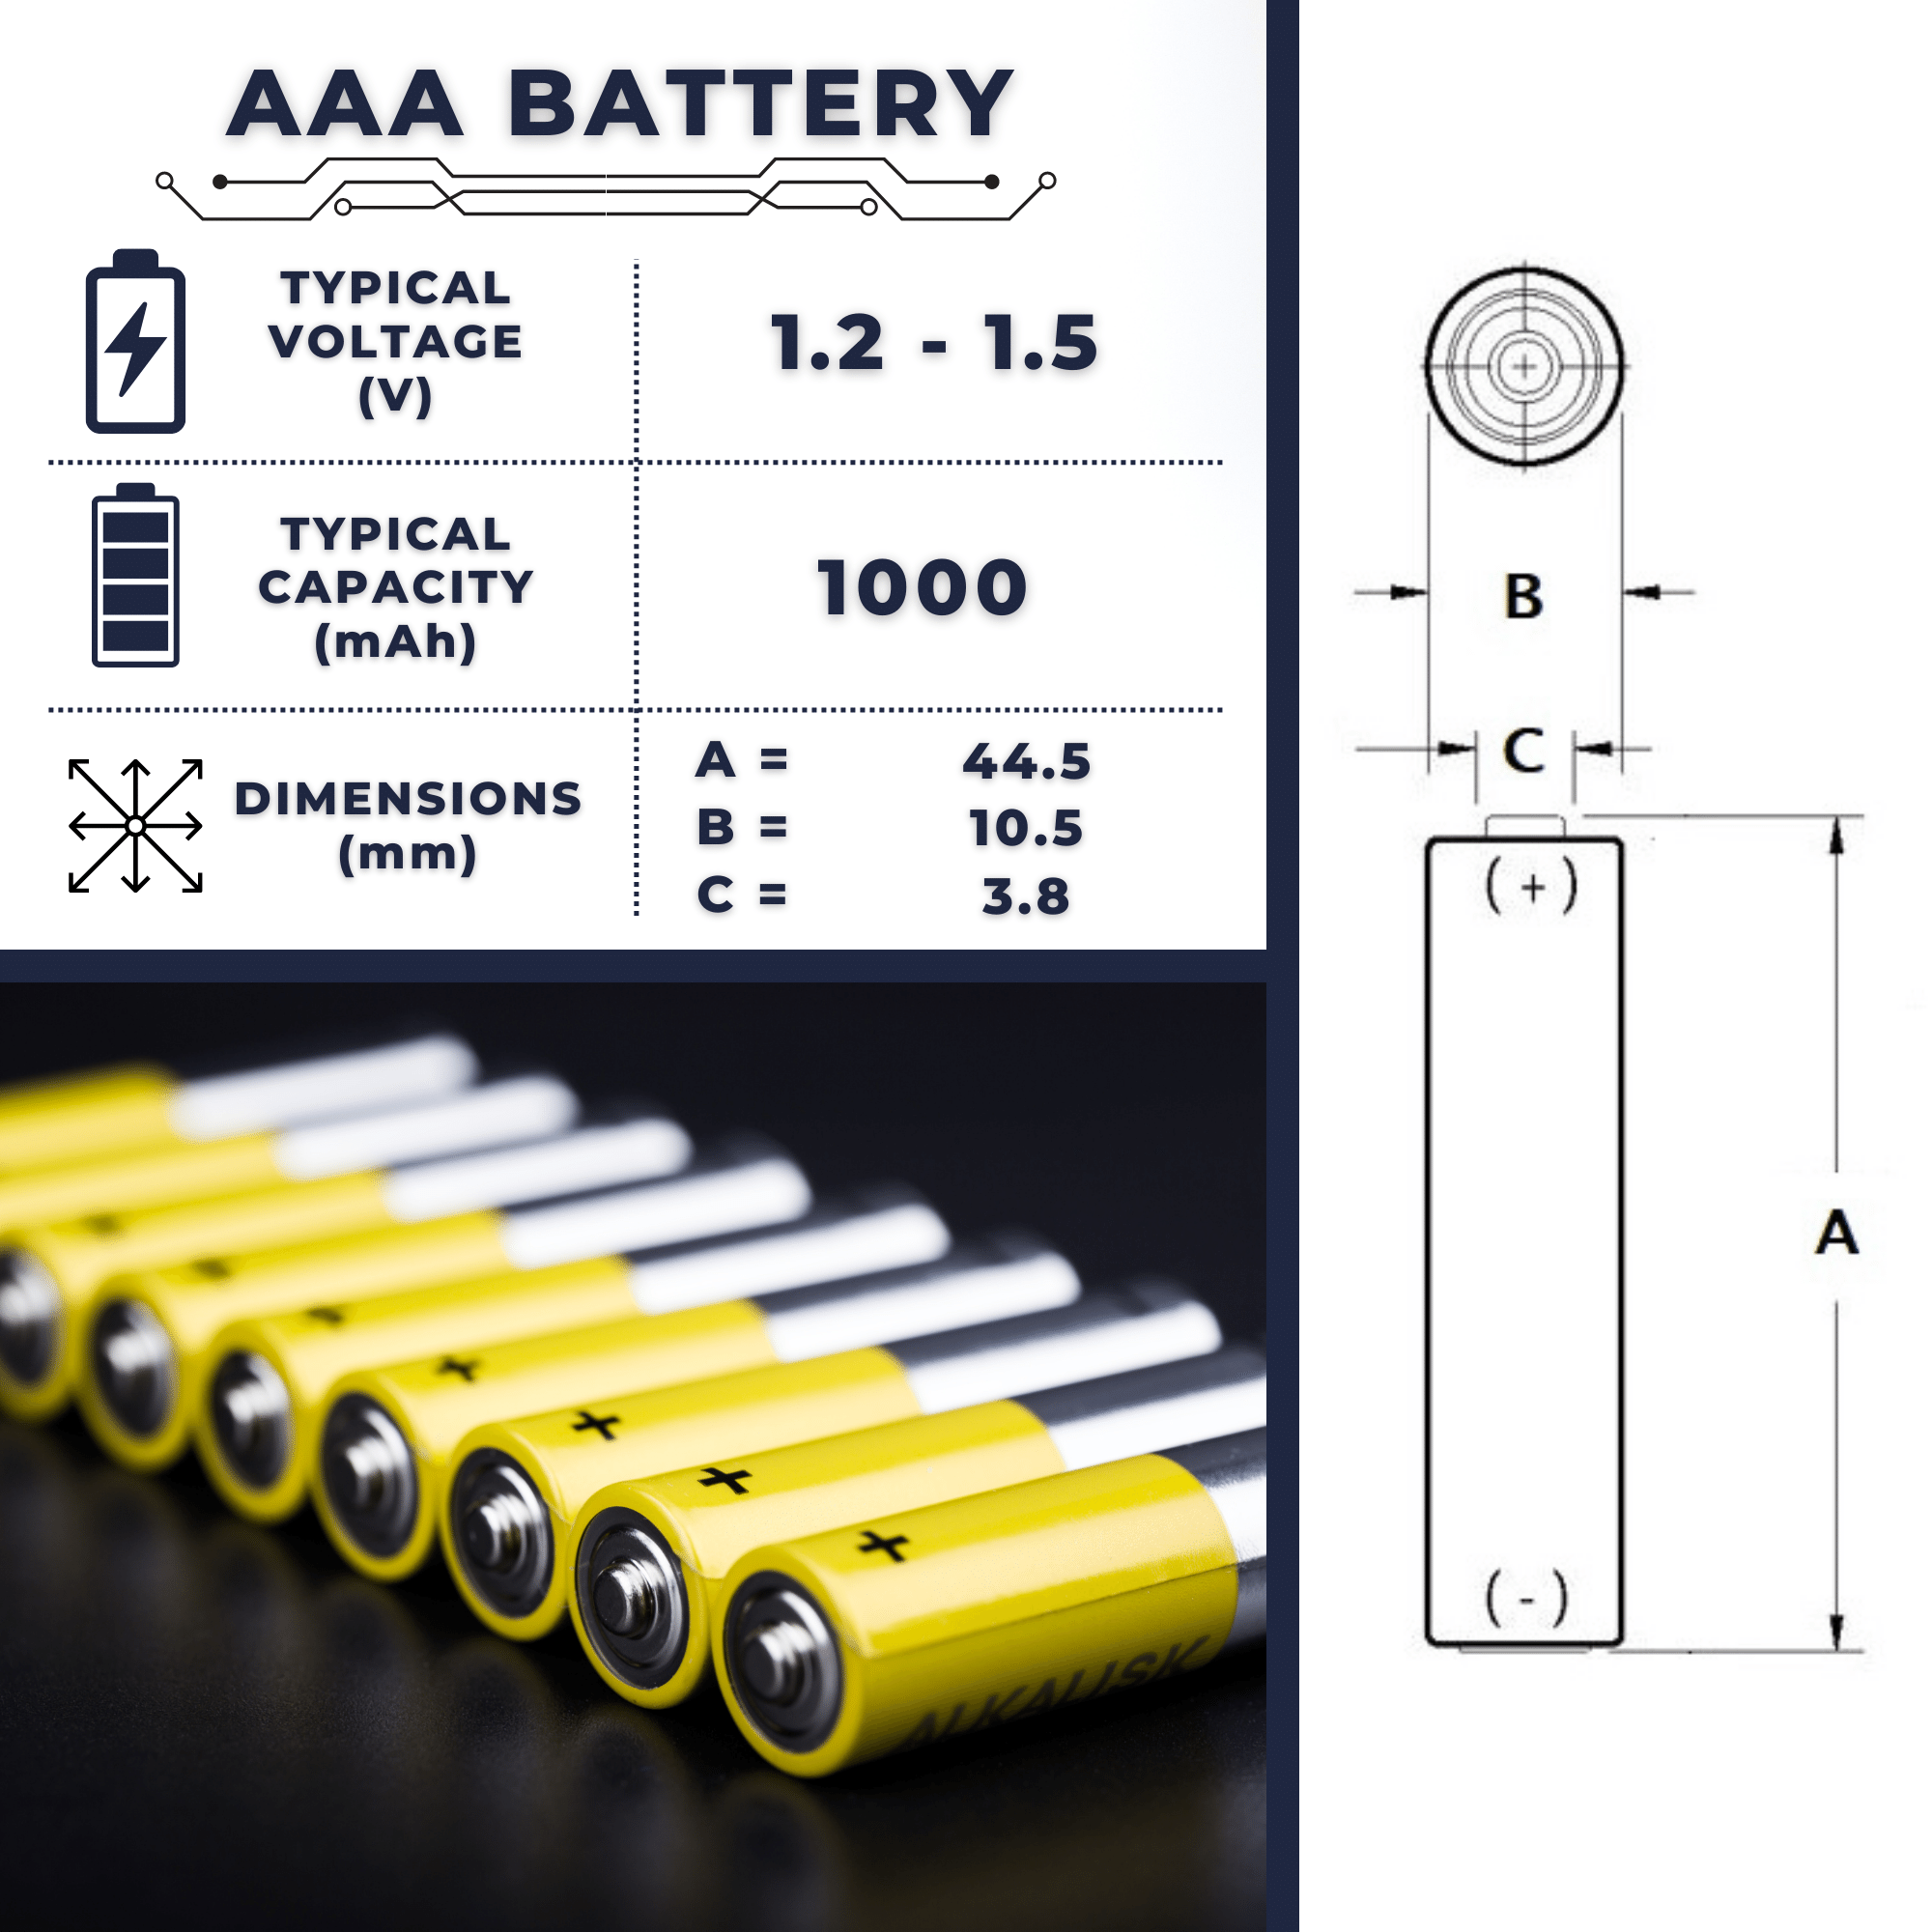 https://www.electricity-magnetism.org/wp-content/uploads/2022/11/AAA-battery-size-weight-applications-2.png